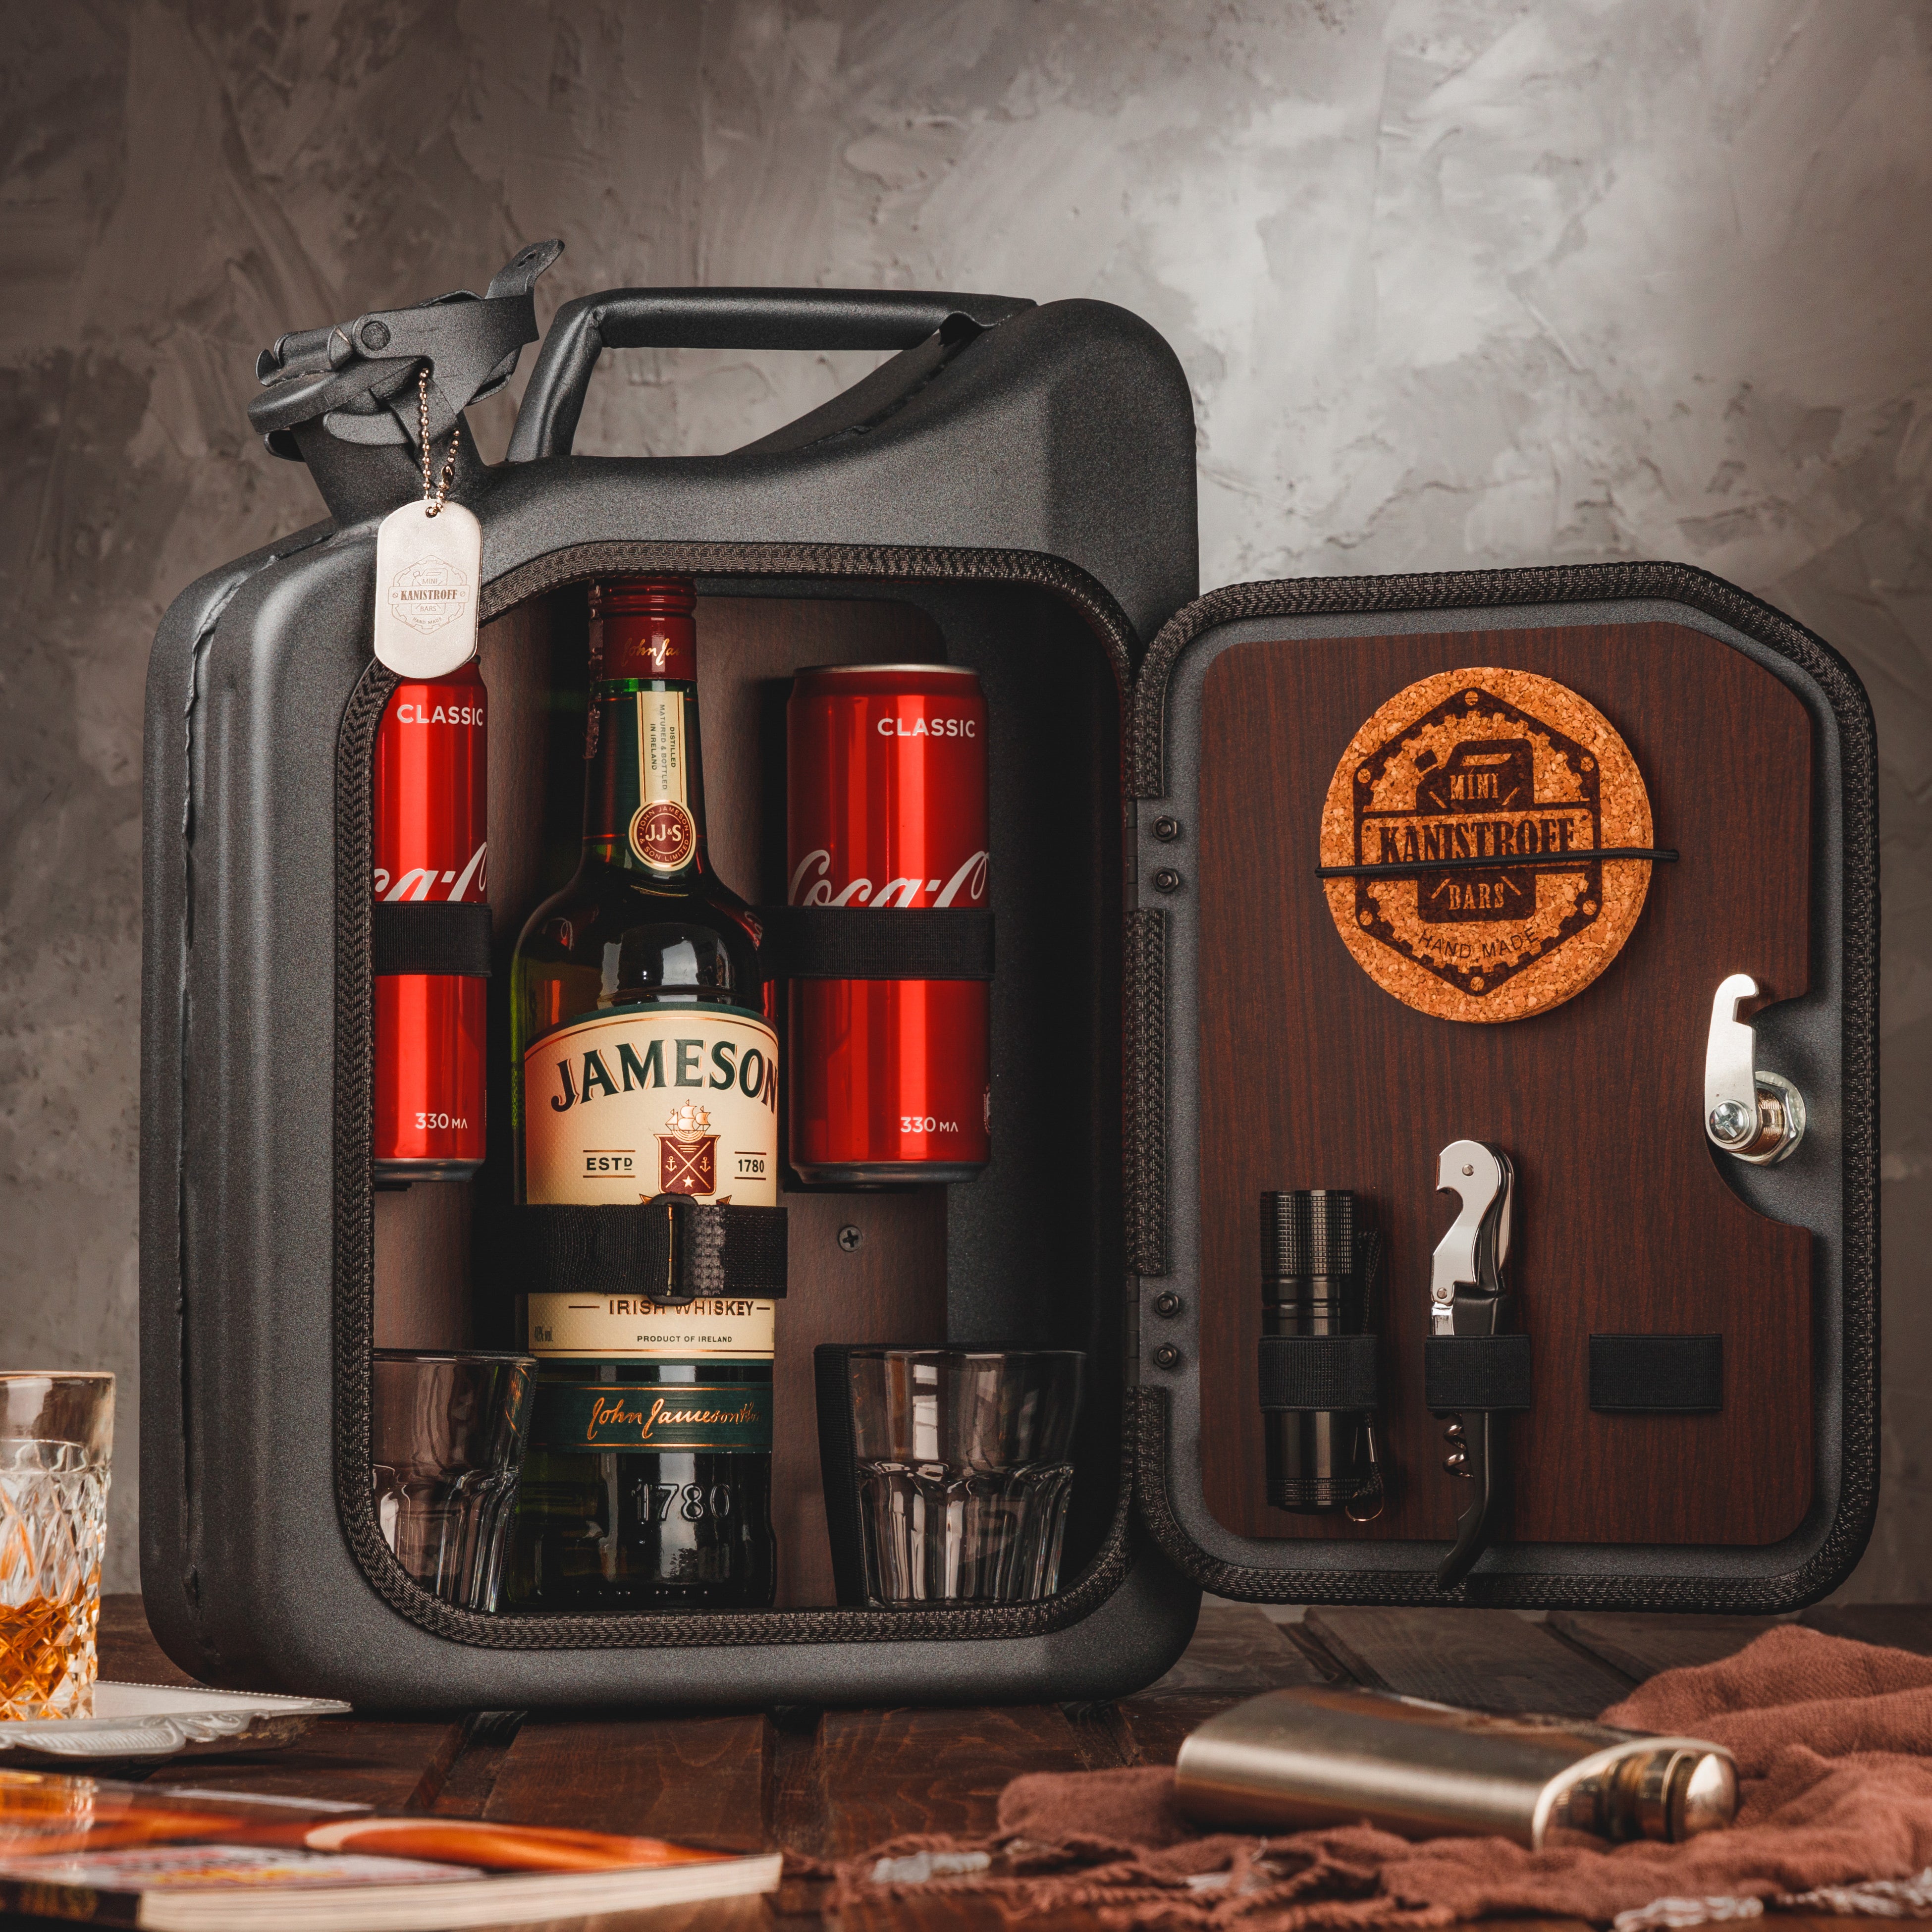 Jerry Can Bar